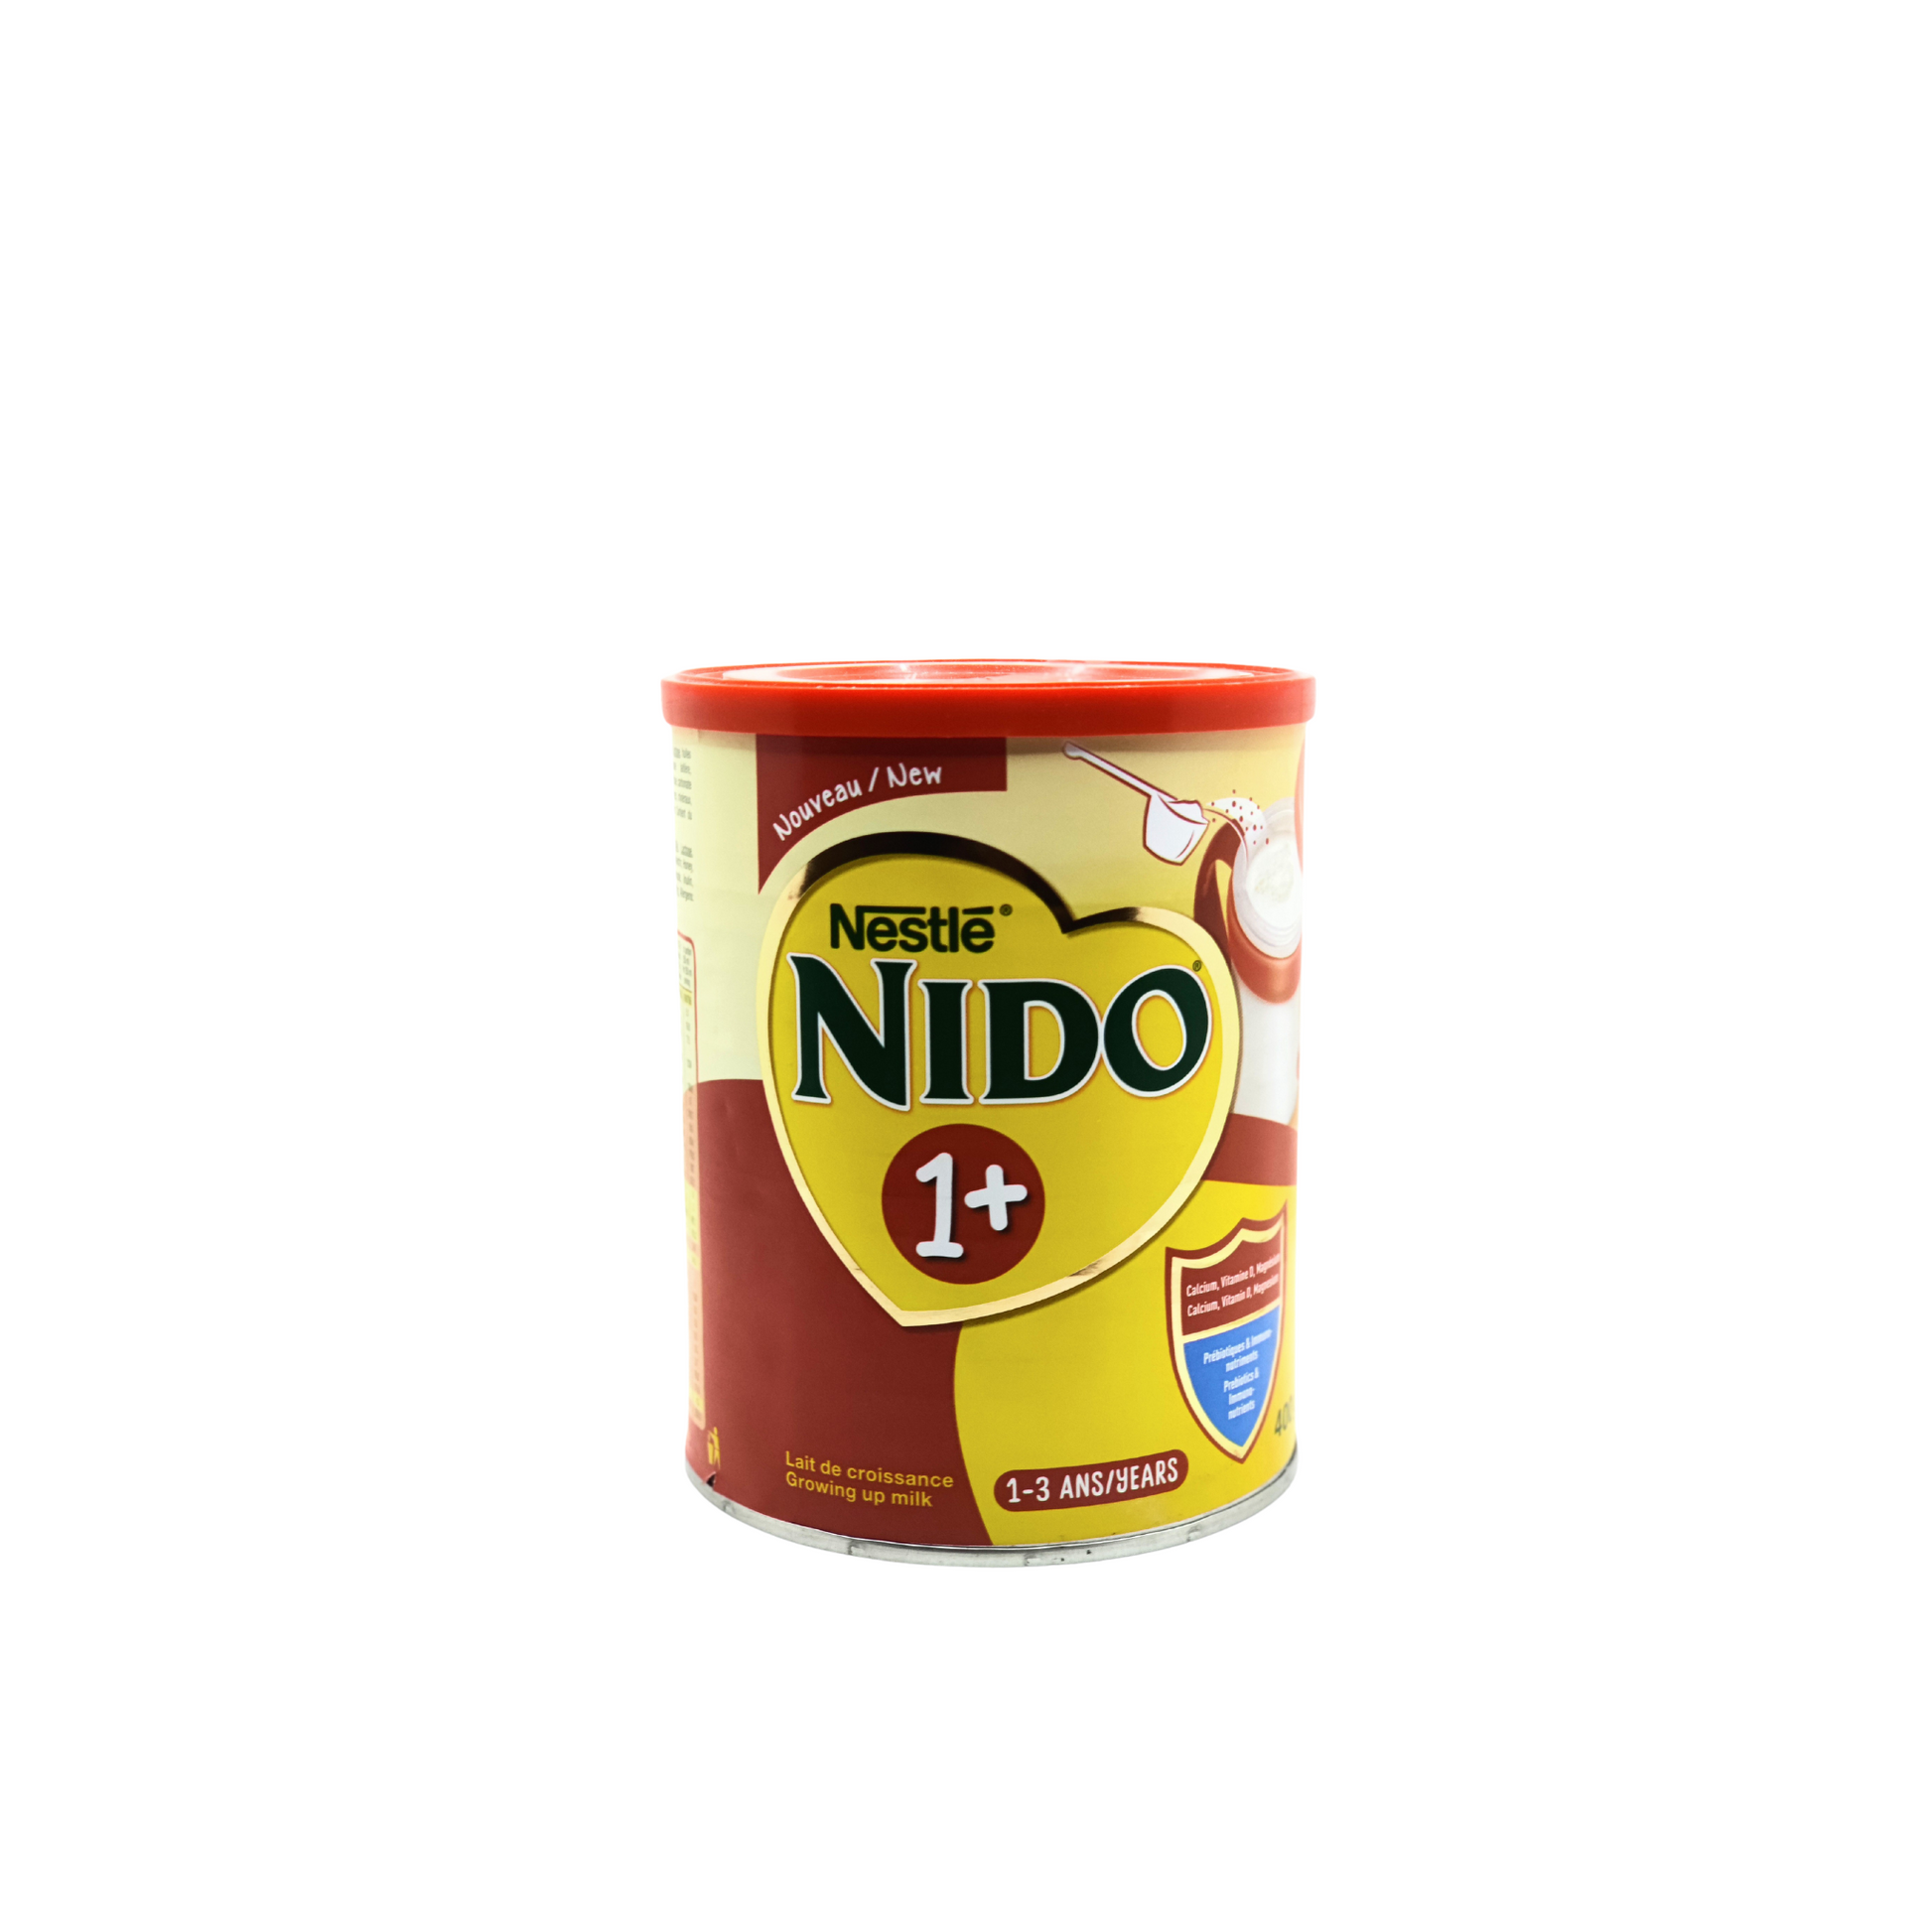 400 gram container of nido one plus growing up milk